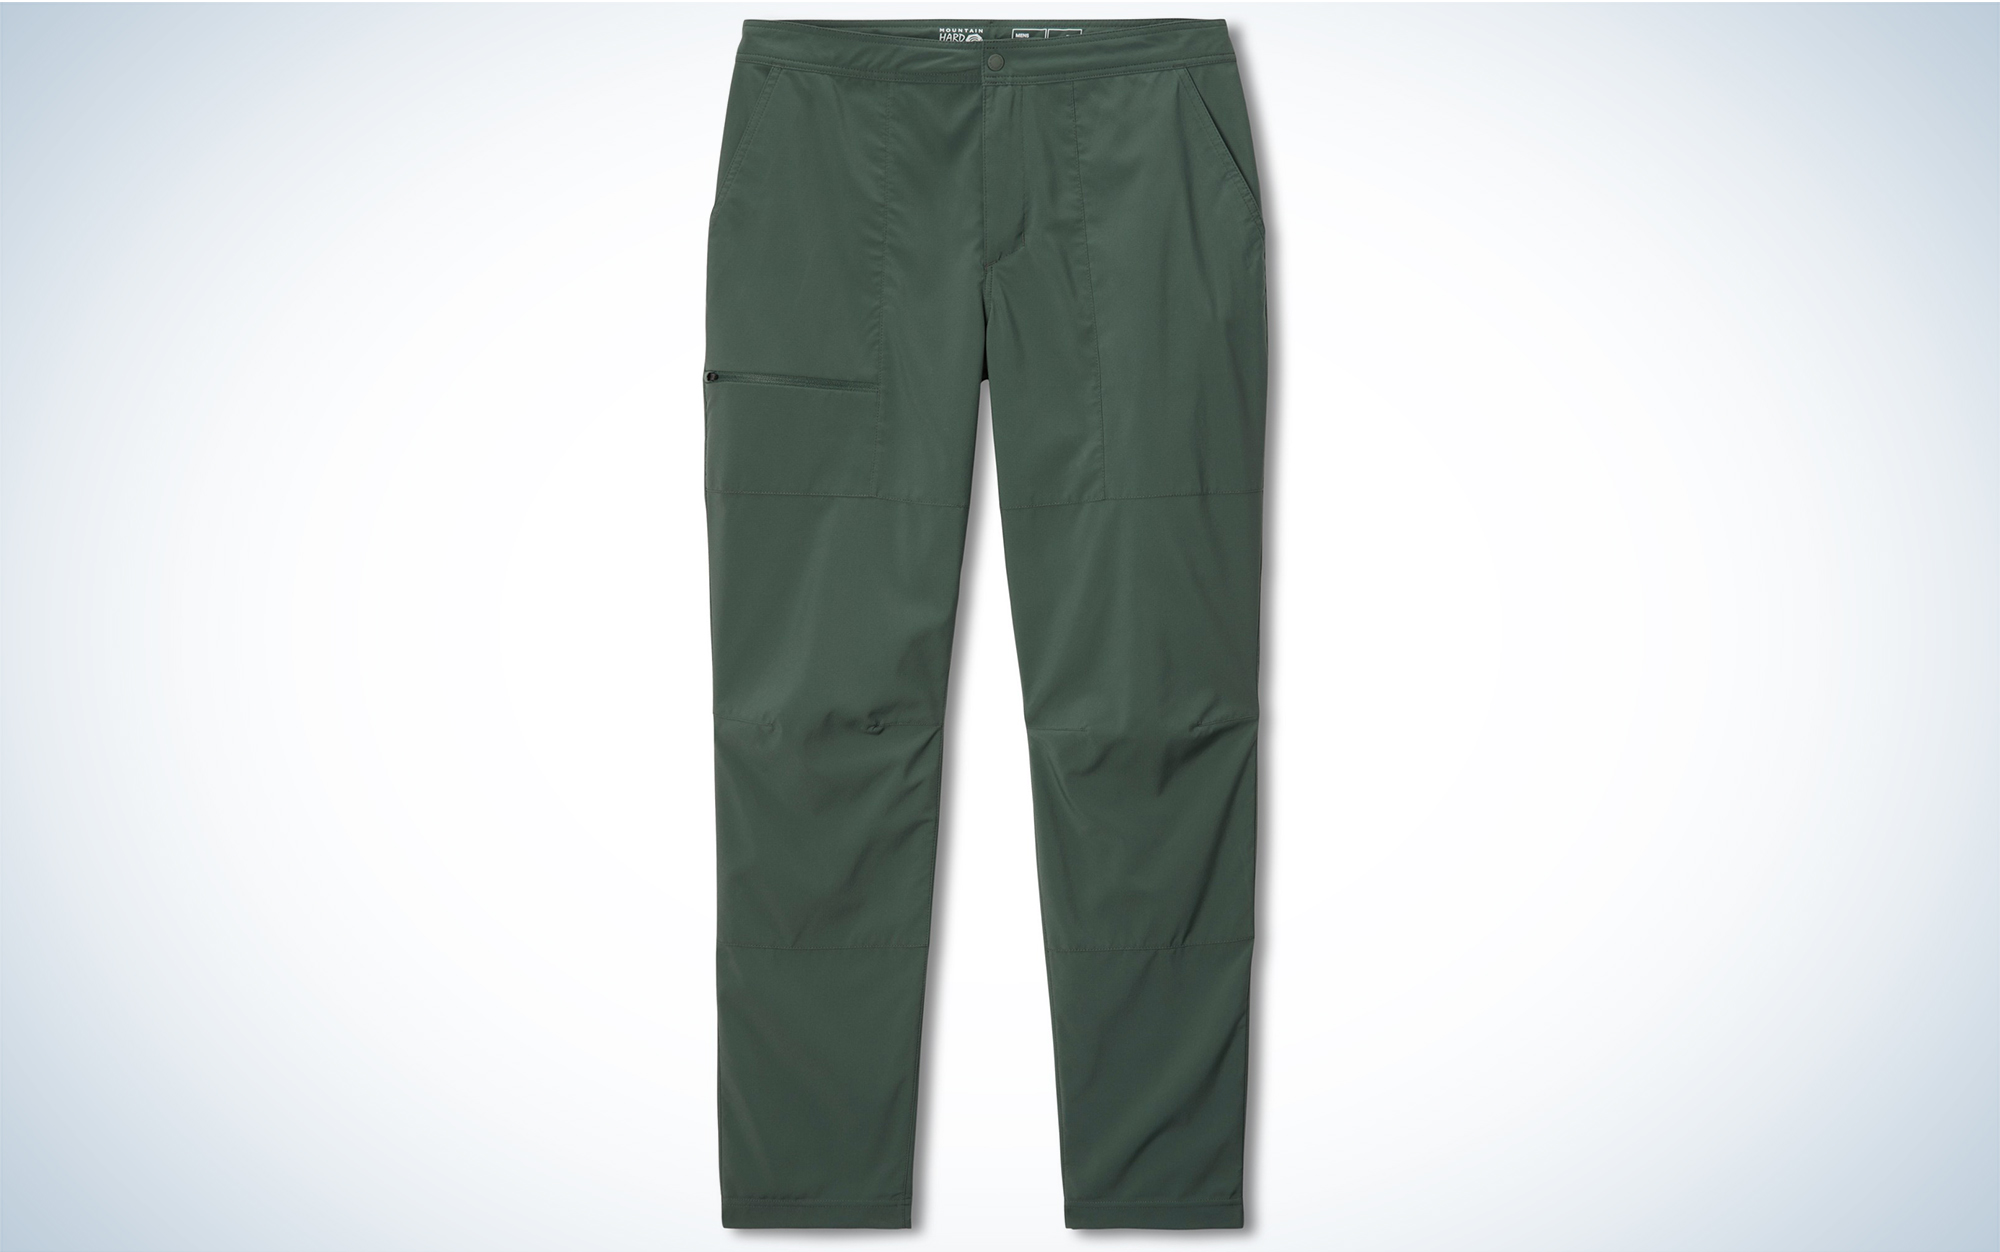 Best Hiking Pants 2023 - Forbes Vetted